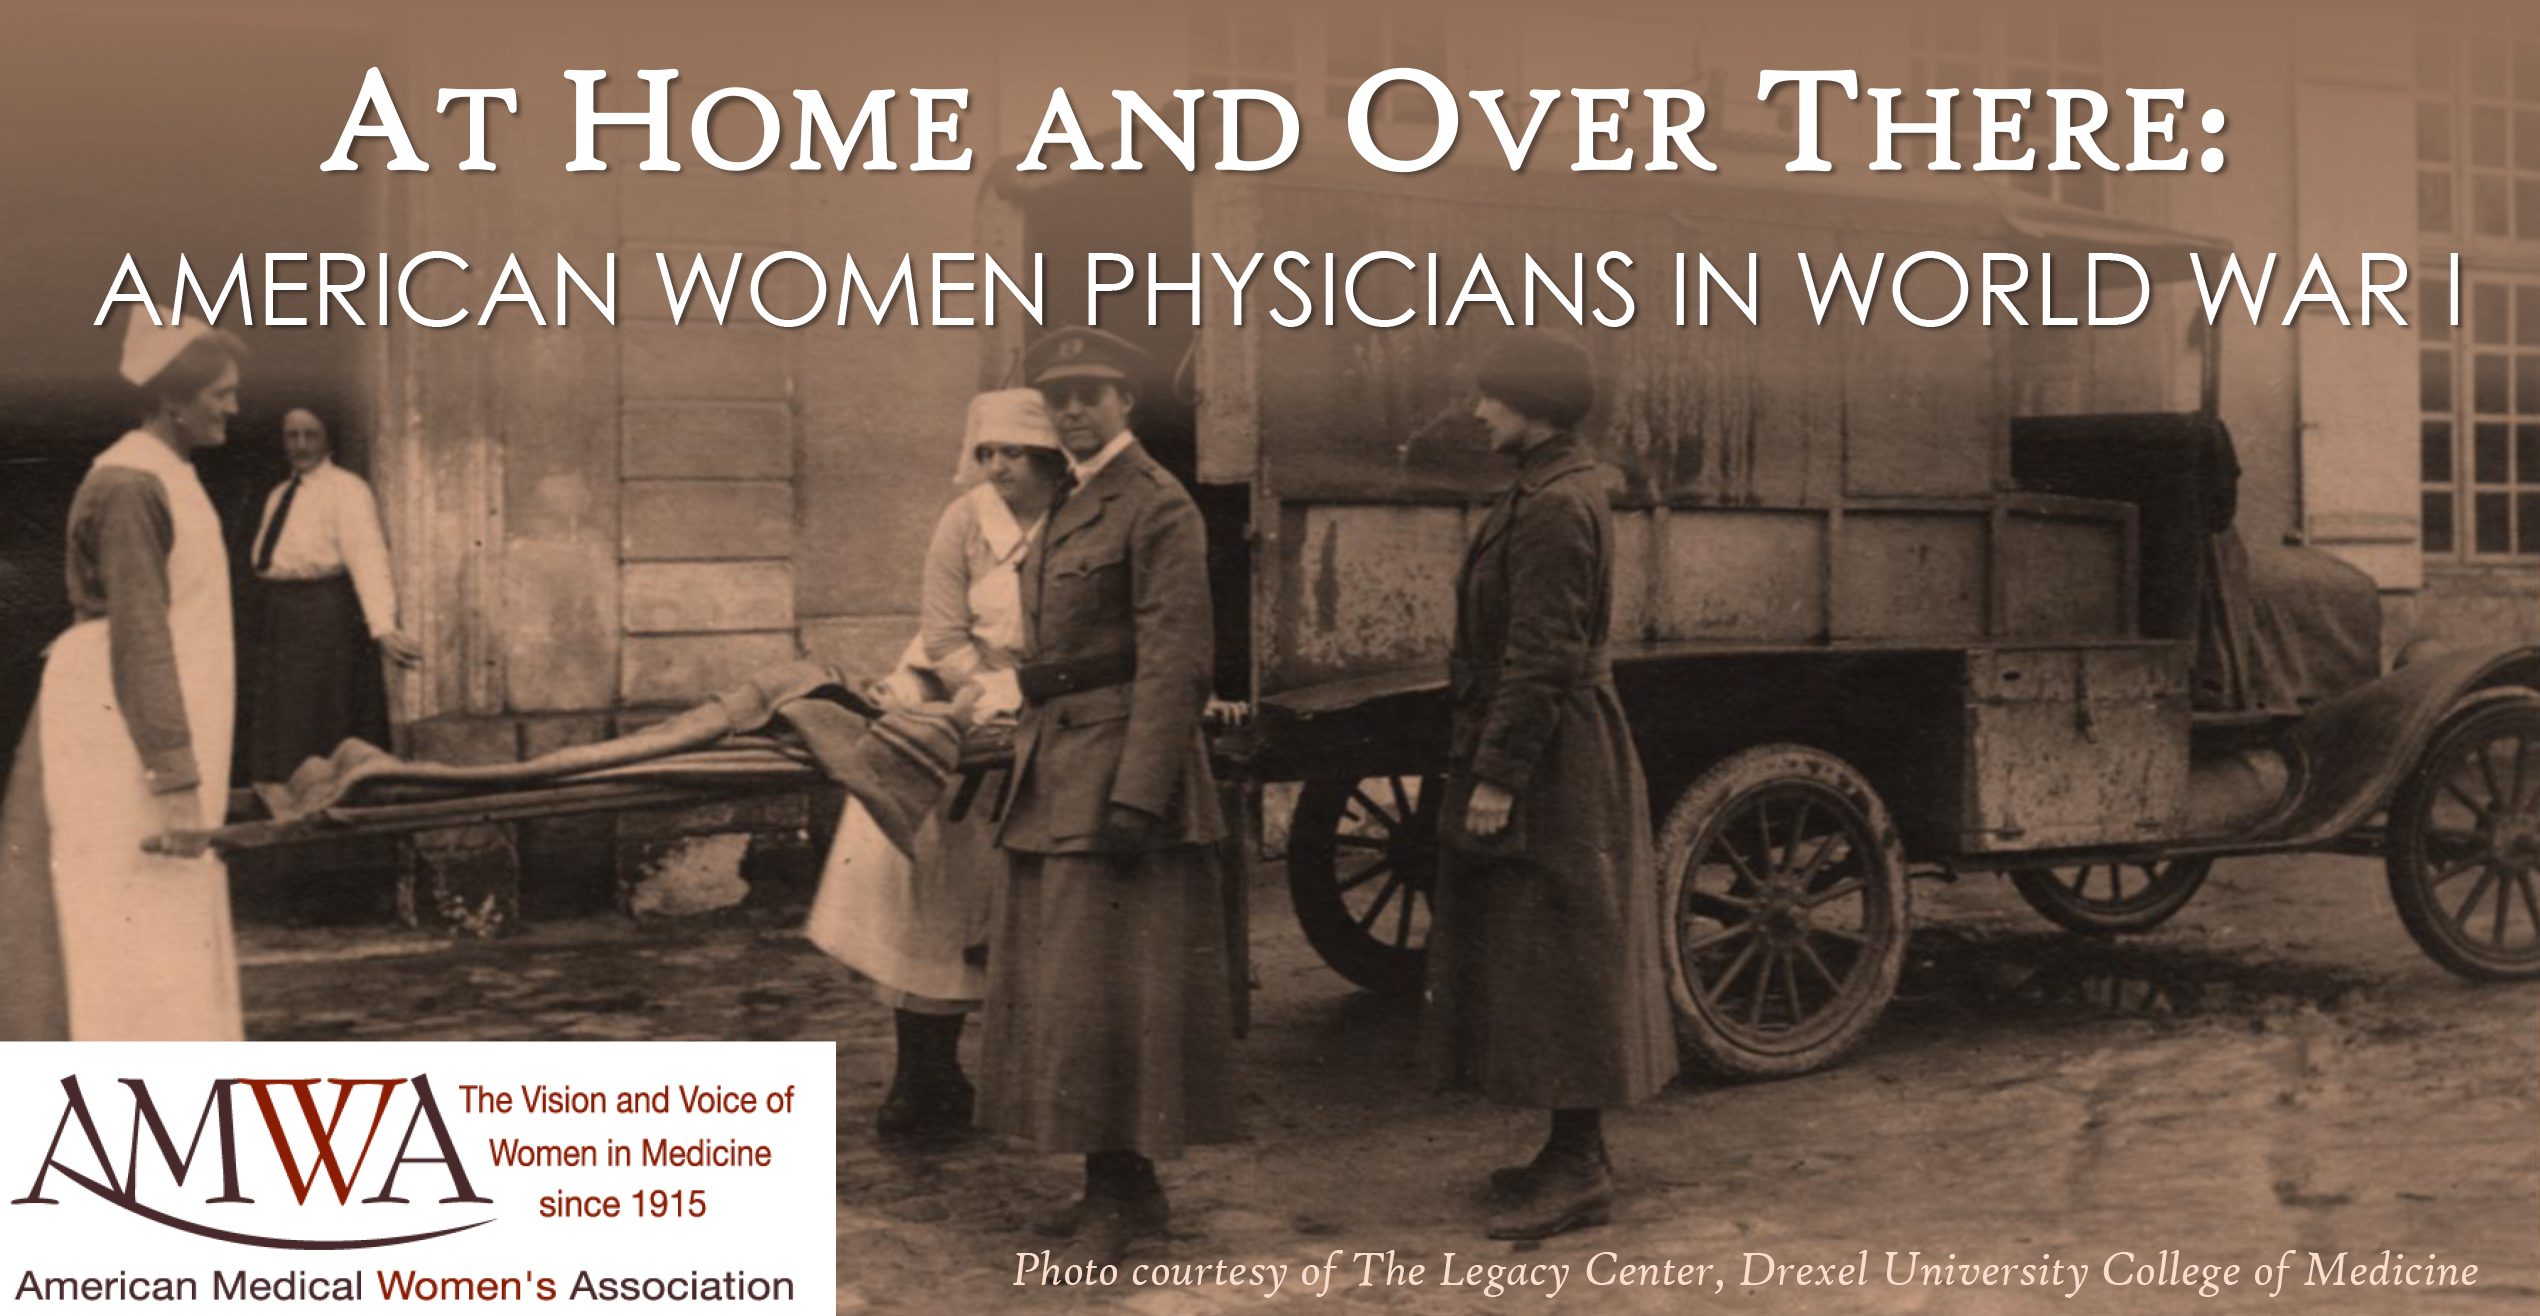 At Home and Over There: American Women Physicians in World War I